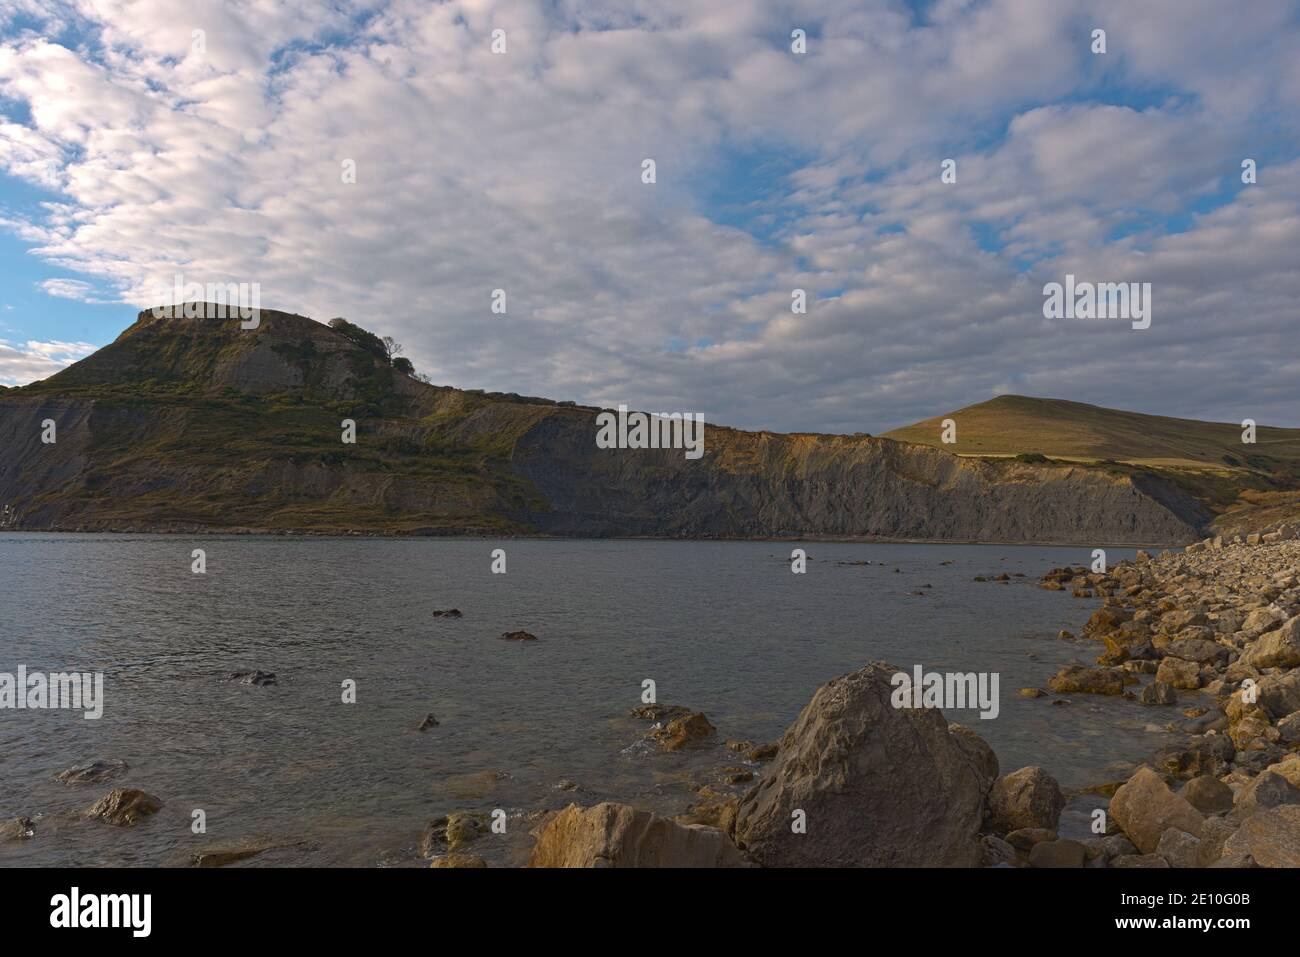 Landscape view across Chapmans Pool looking towards Egmont Point and Houns-tout Cliff on the Jurassic Coast on the Dorset Coast, England. Stock Photo